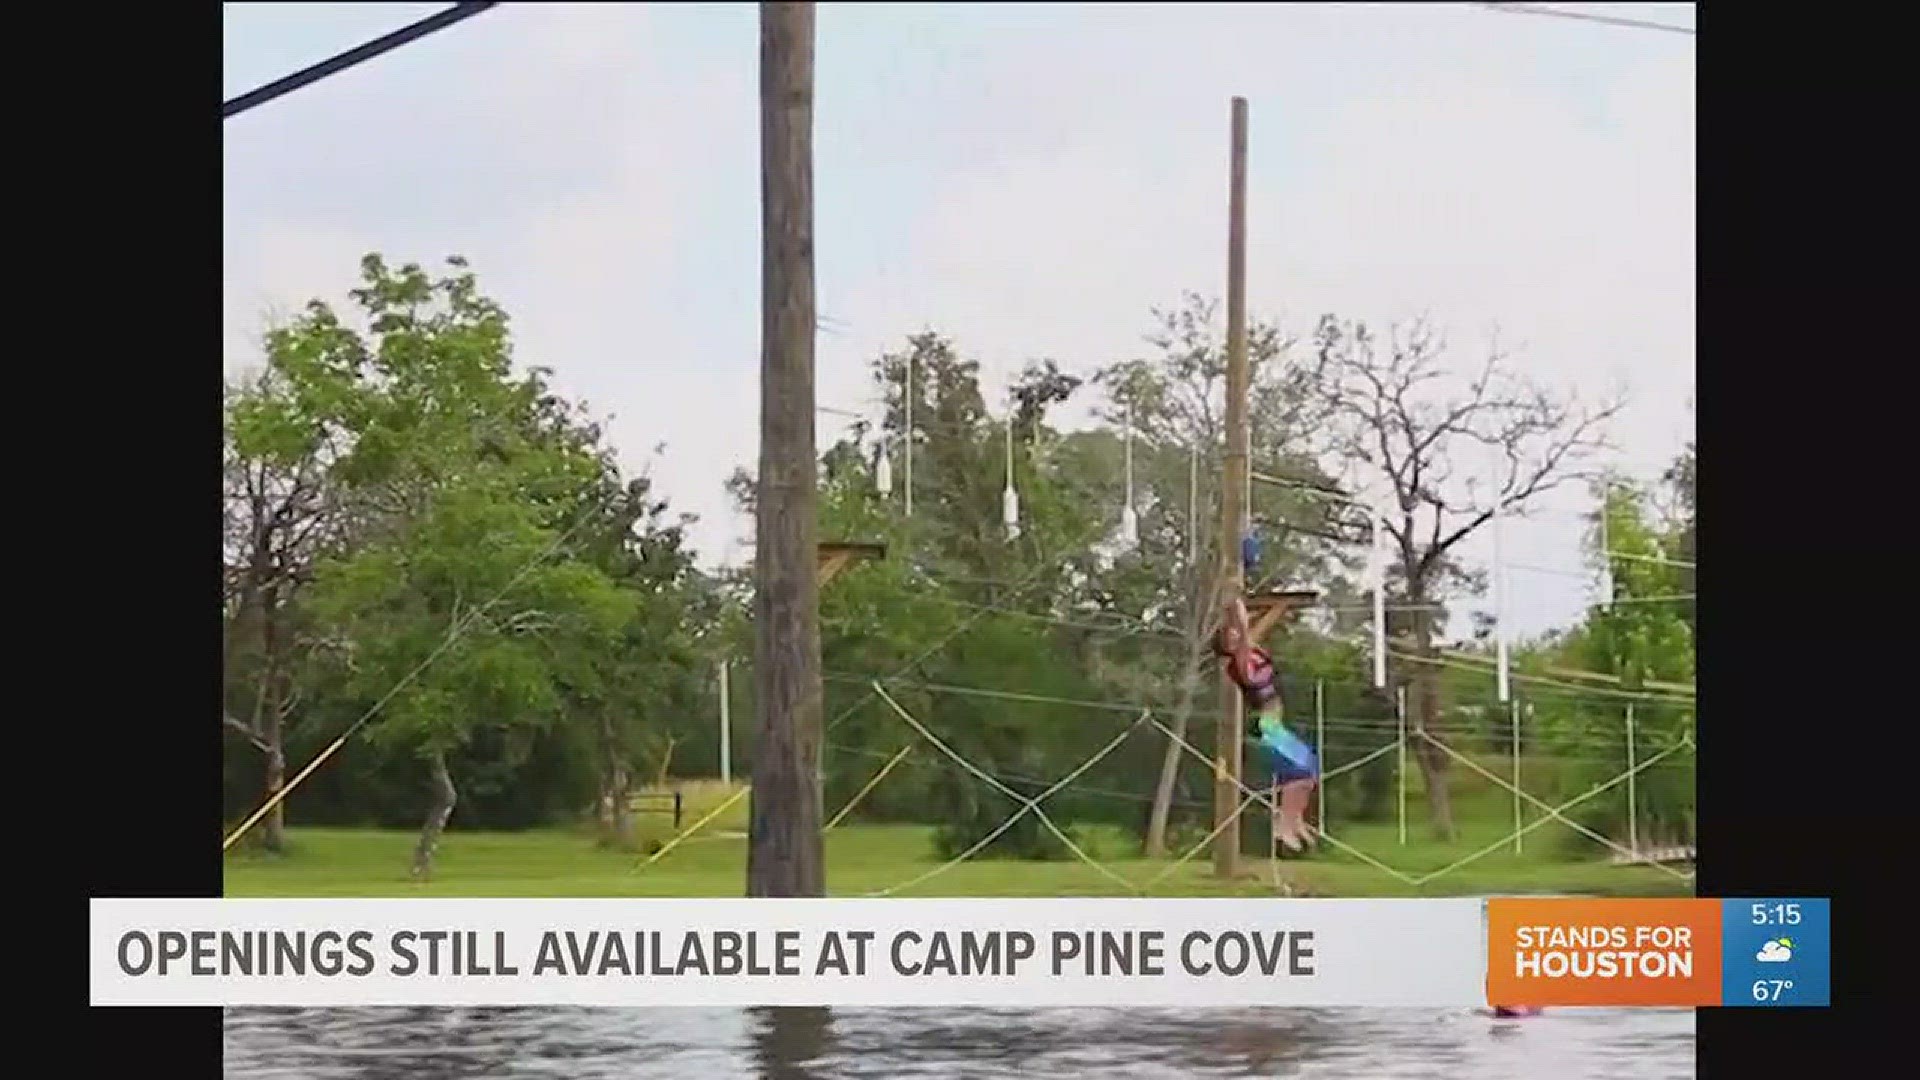 All week long we're featuring different summer camps and Tuesday morning, Brandi's learning more about an overnight camp in Columbus that still has space left!